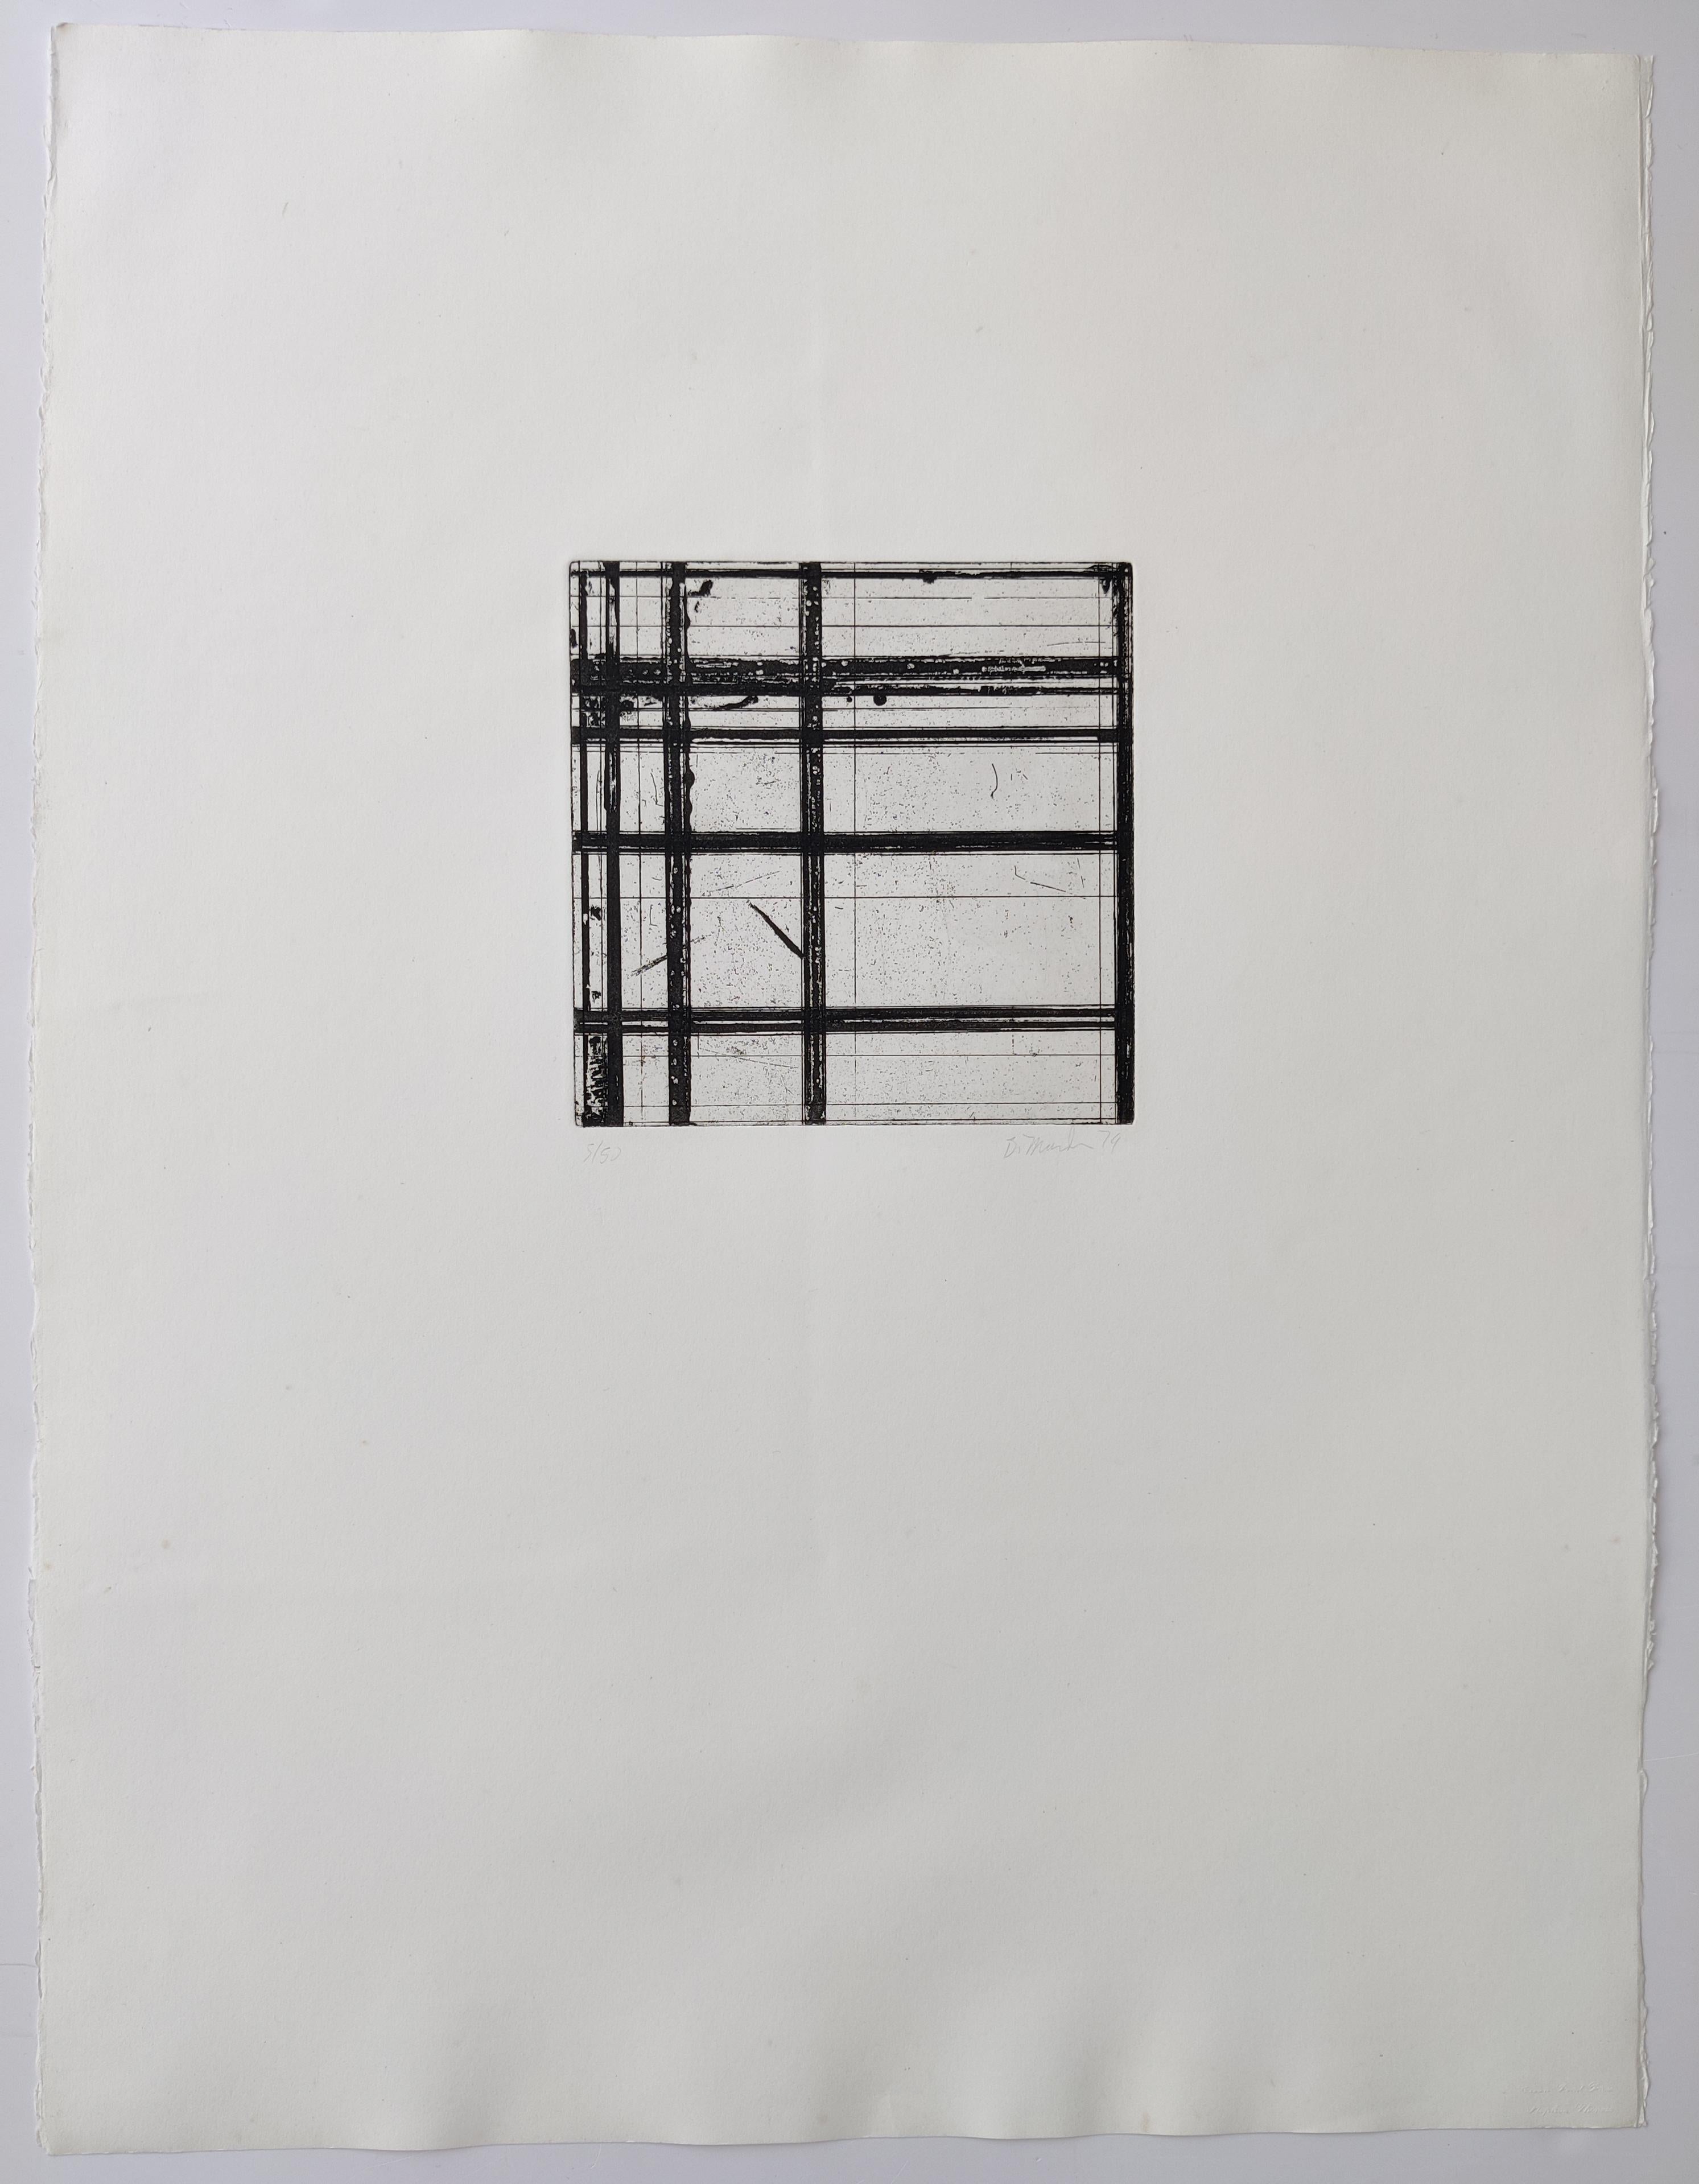 Brice Marden 
Tiles, 1979
Etching with aquatint, on Somerset satin paper
Edition 5 / 50 lower left
Hang signed and dated lower right
Image size 20 x 20 cm
Sheet size 75 x 57 cm
Reference   P07849